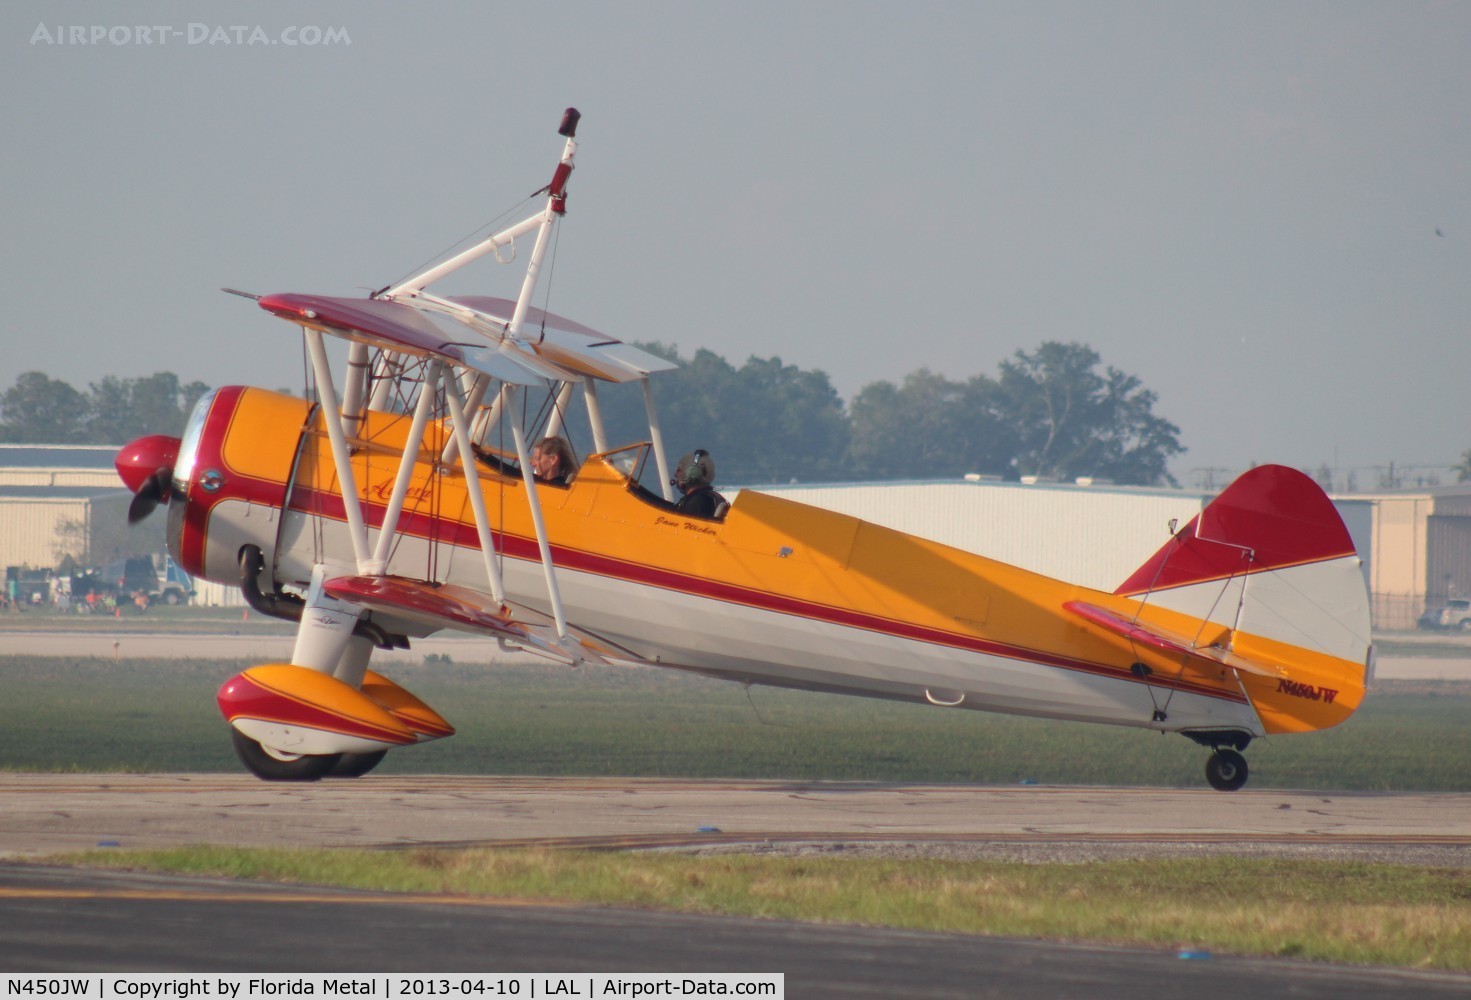 N450JW, 1941 Boeing IB75A C/N 75-789, Stearman at Sun N Fun.  This aircraft crashed later in 2013 at the Dayton Ohio Vectron Airshow killing both the pilot and the wing walker